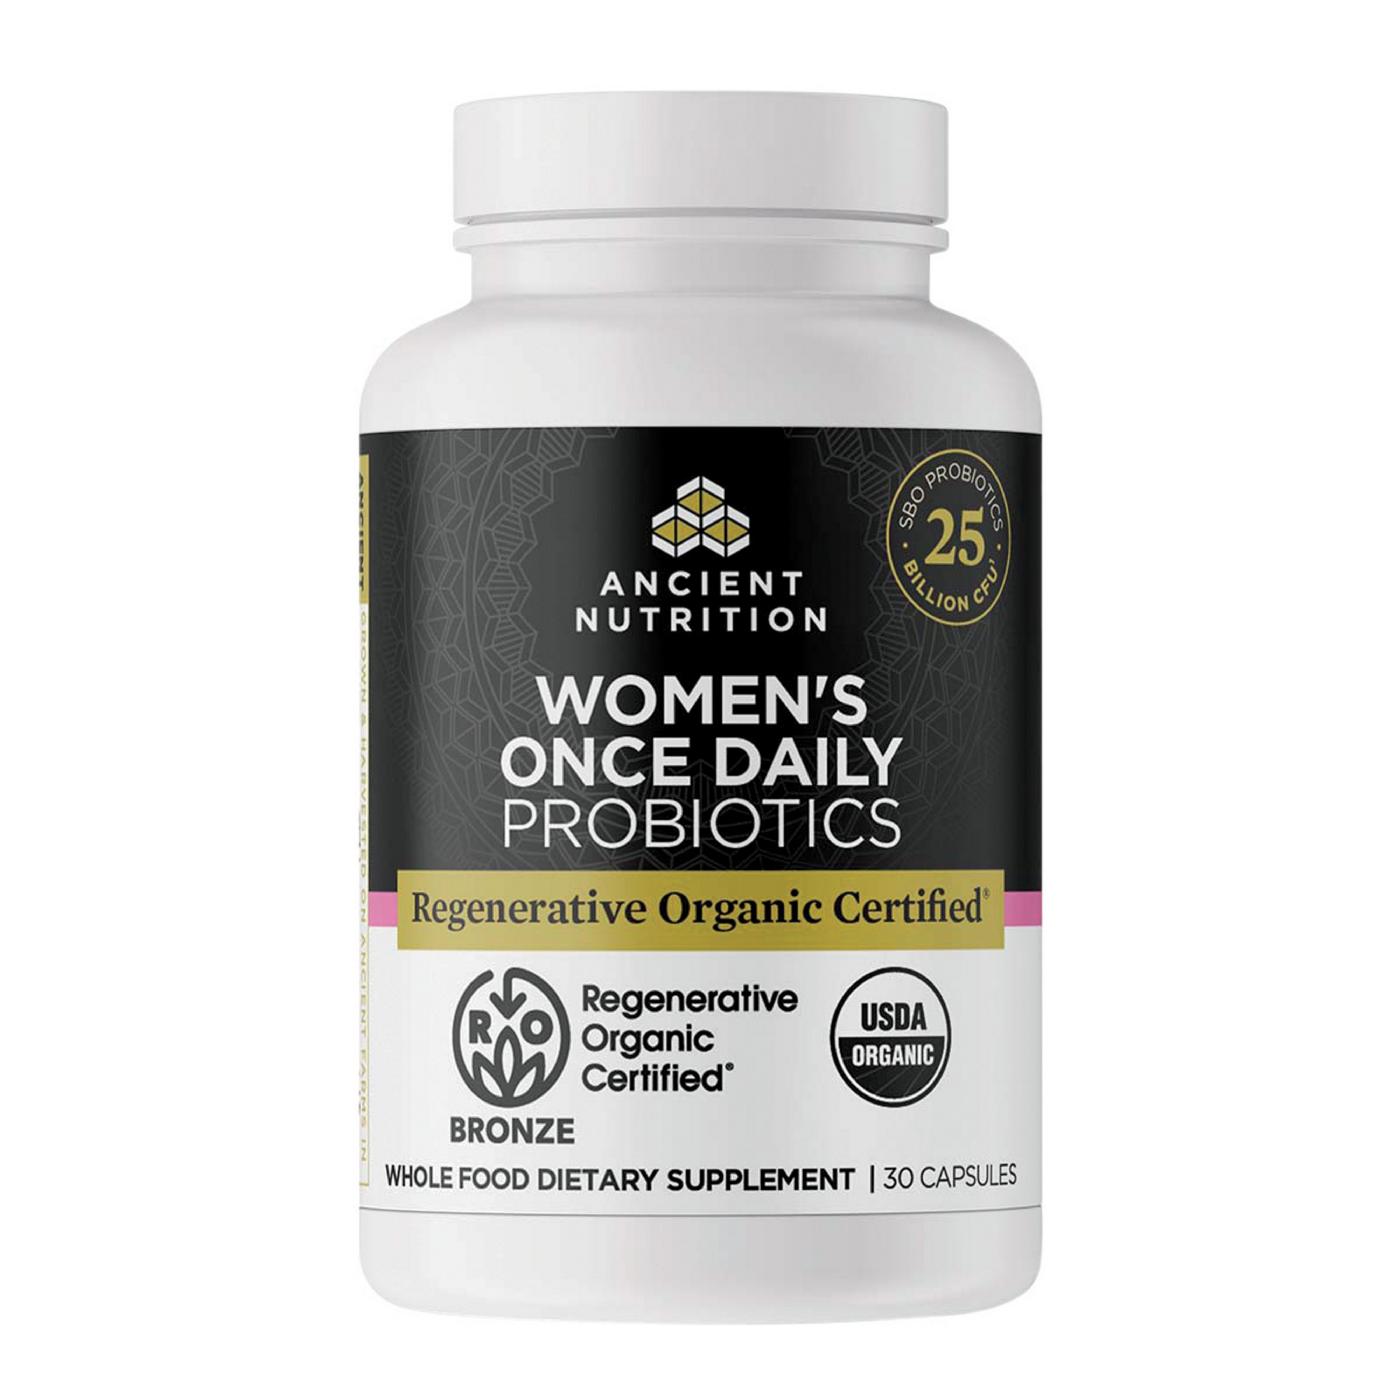 Ancient Nutrition Women's Once Daily Probiotics Capsules; image 1 of 5